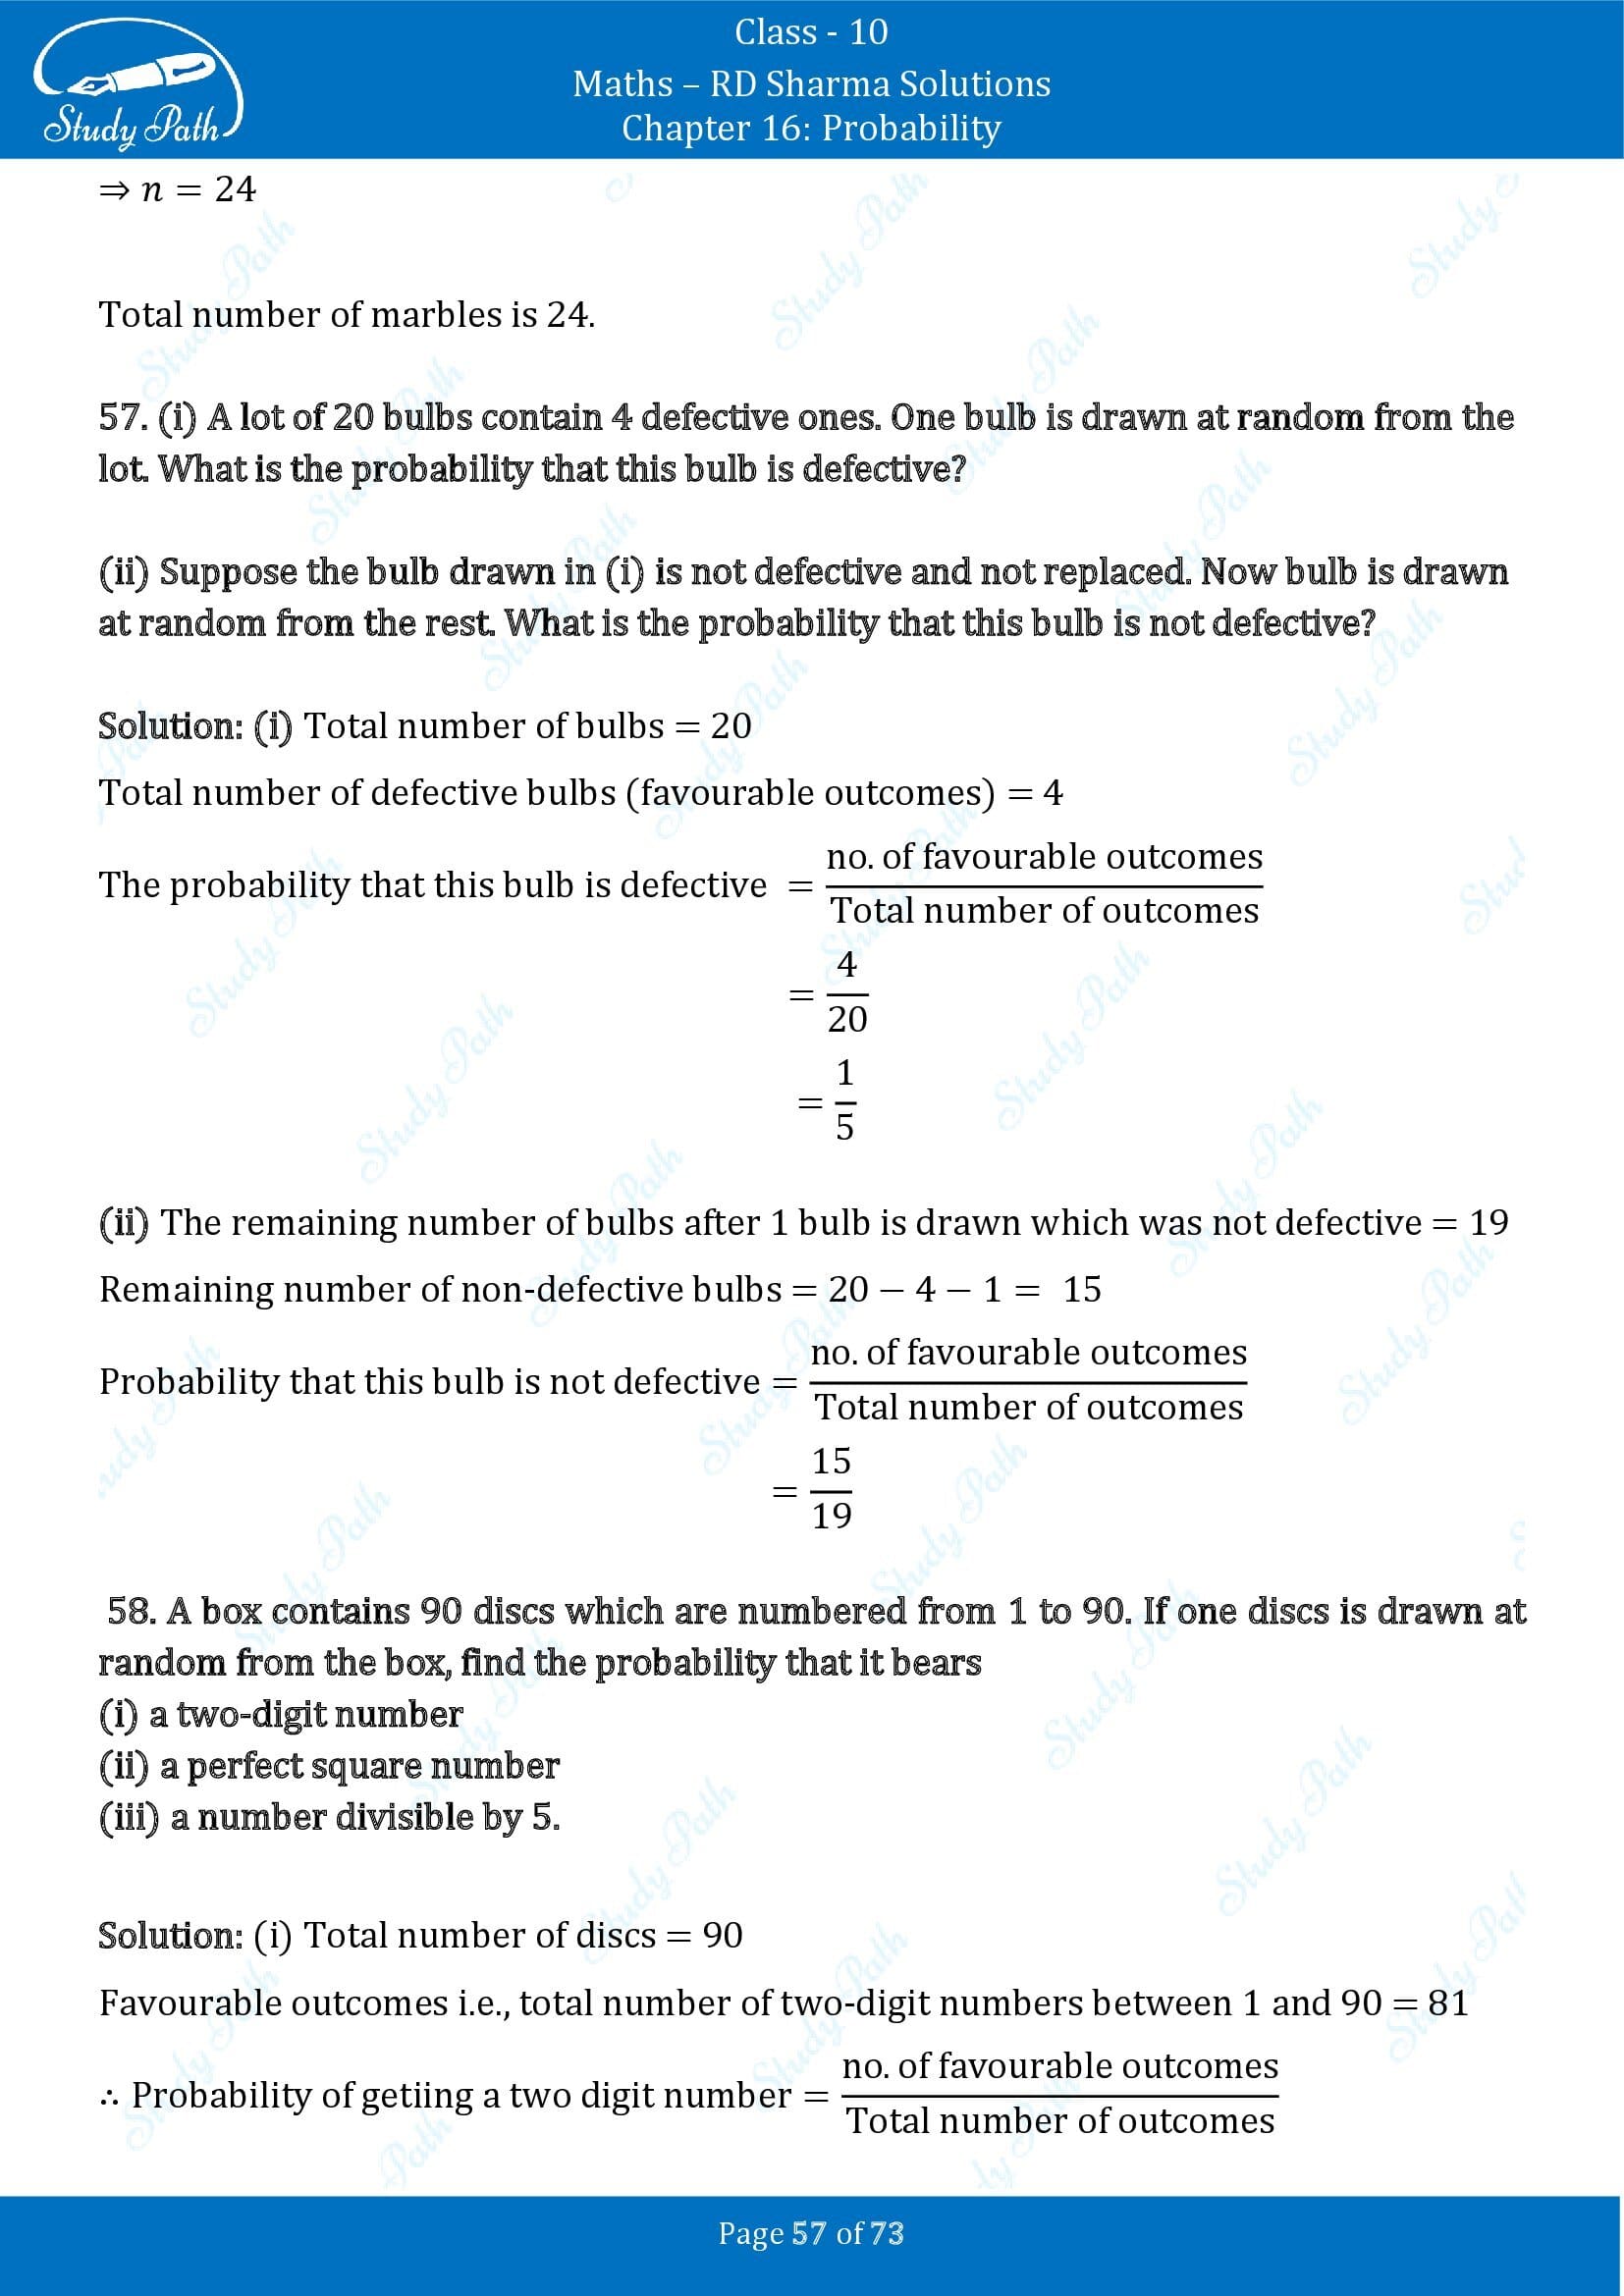 RD Sharma Solutions Class 10 Chapter 16 Probability Exercise 16.1 00057